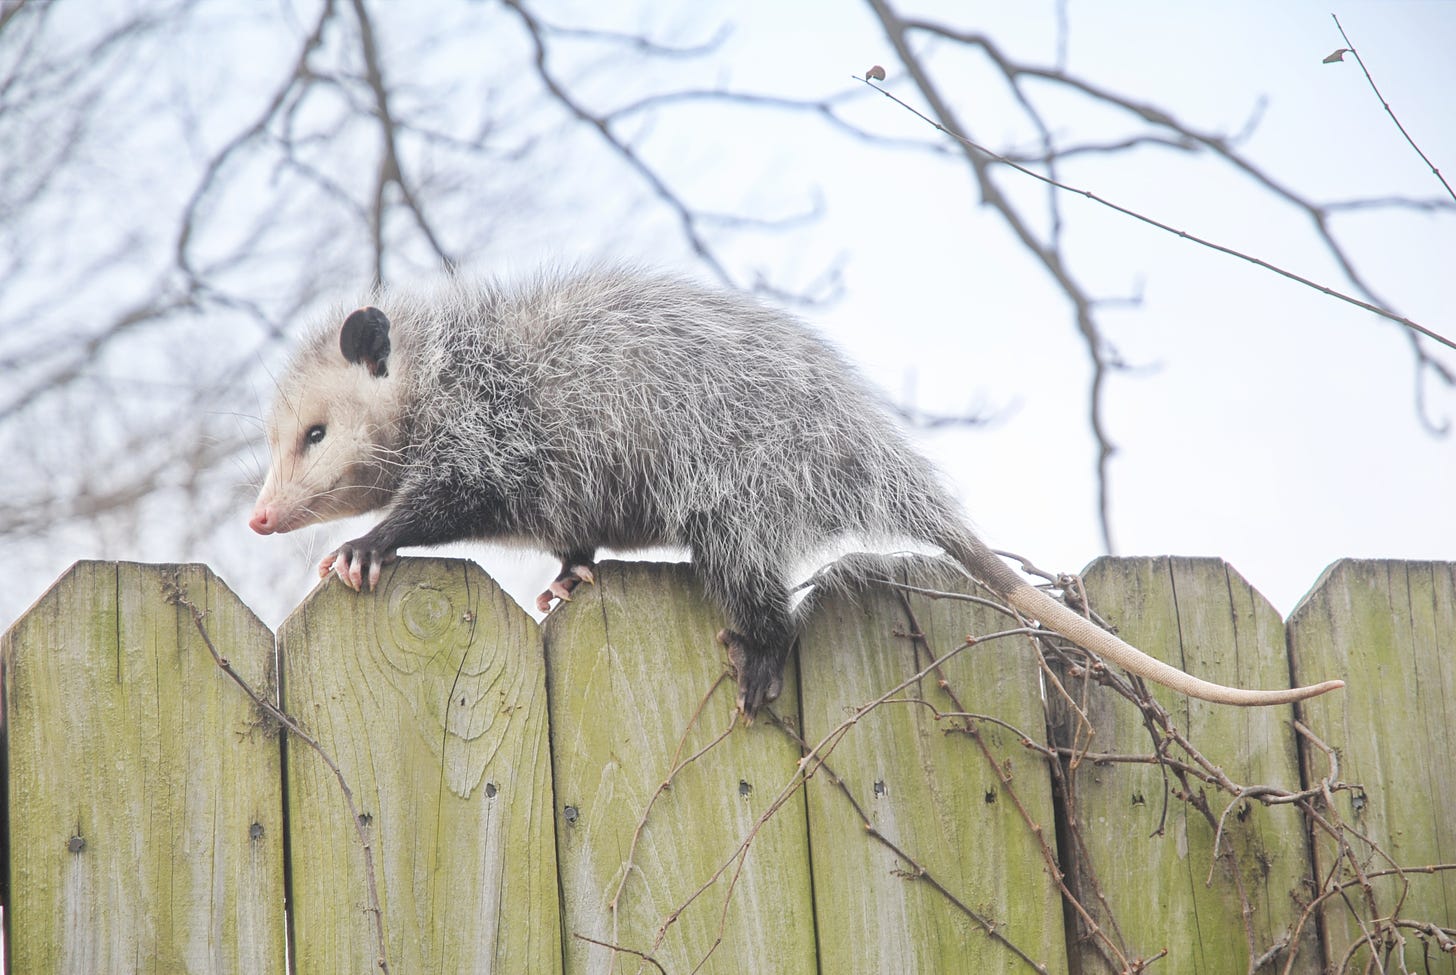 Opossum on a fence on cloudy day